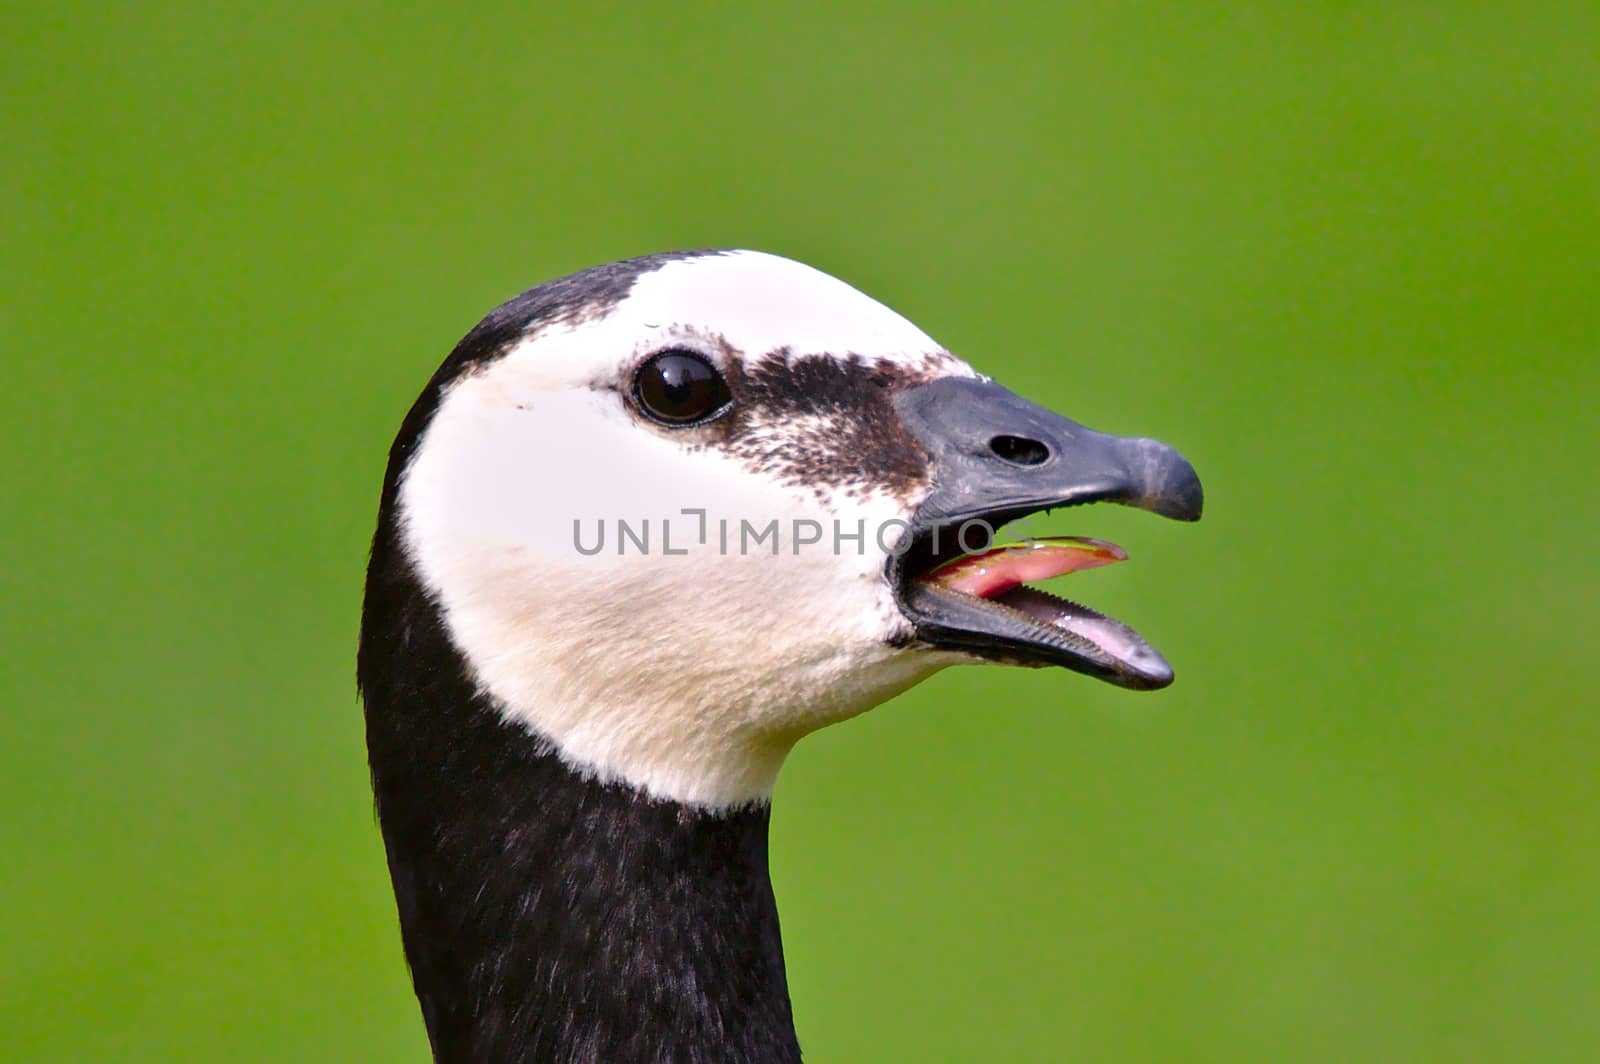 Close photo of screaming canadian goose with mouth open and tongue out.